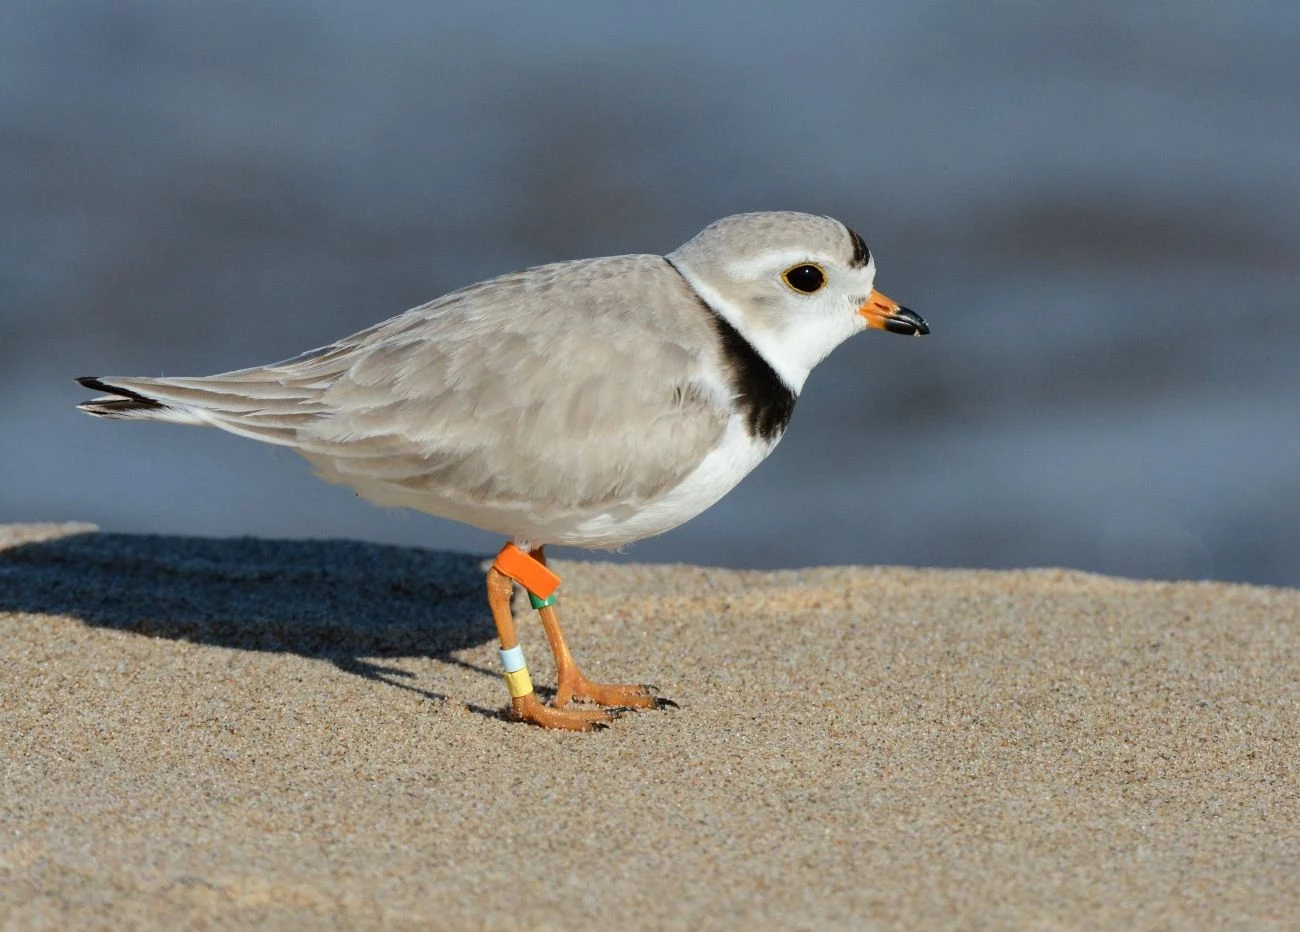 Piping plover, Jim Hudgins/USFWS, Public Domain, https://www.fws.gov/banner/piping-plover-0